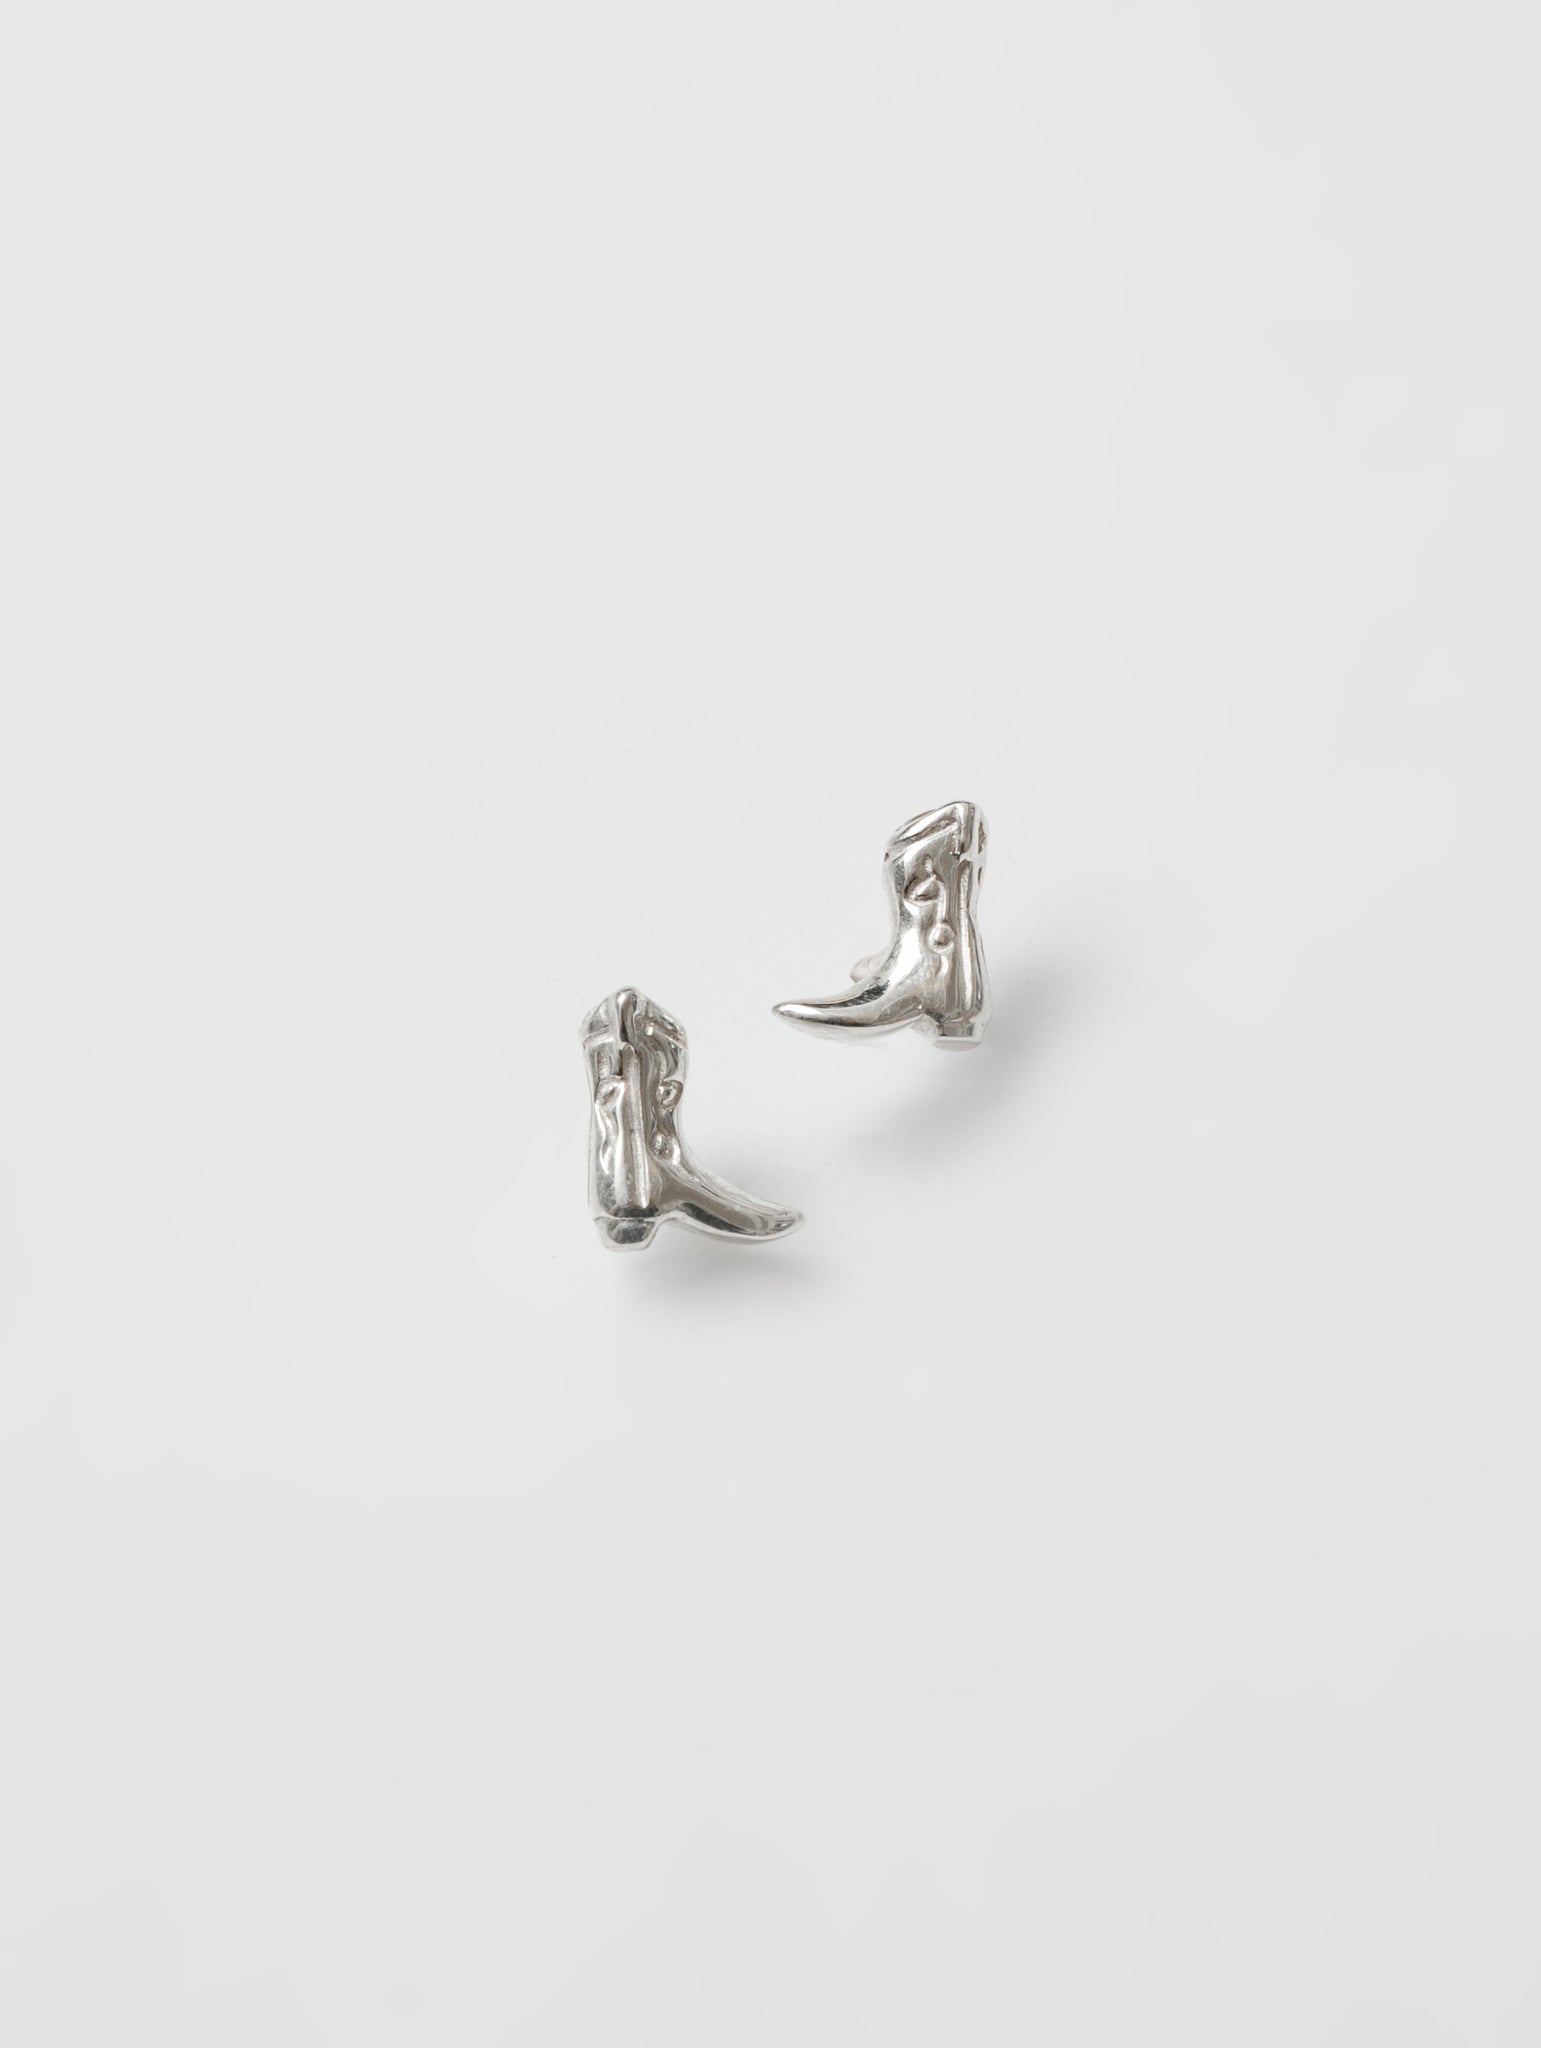 Cowboy Boot Charm Studs Sterling Silver